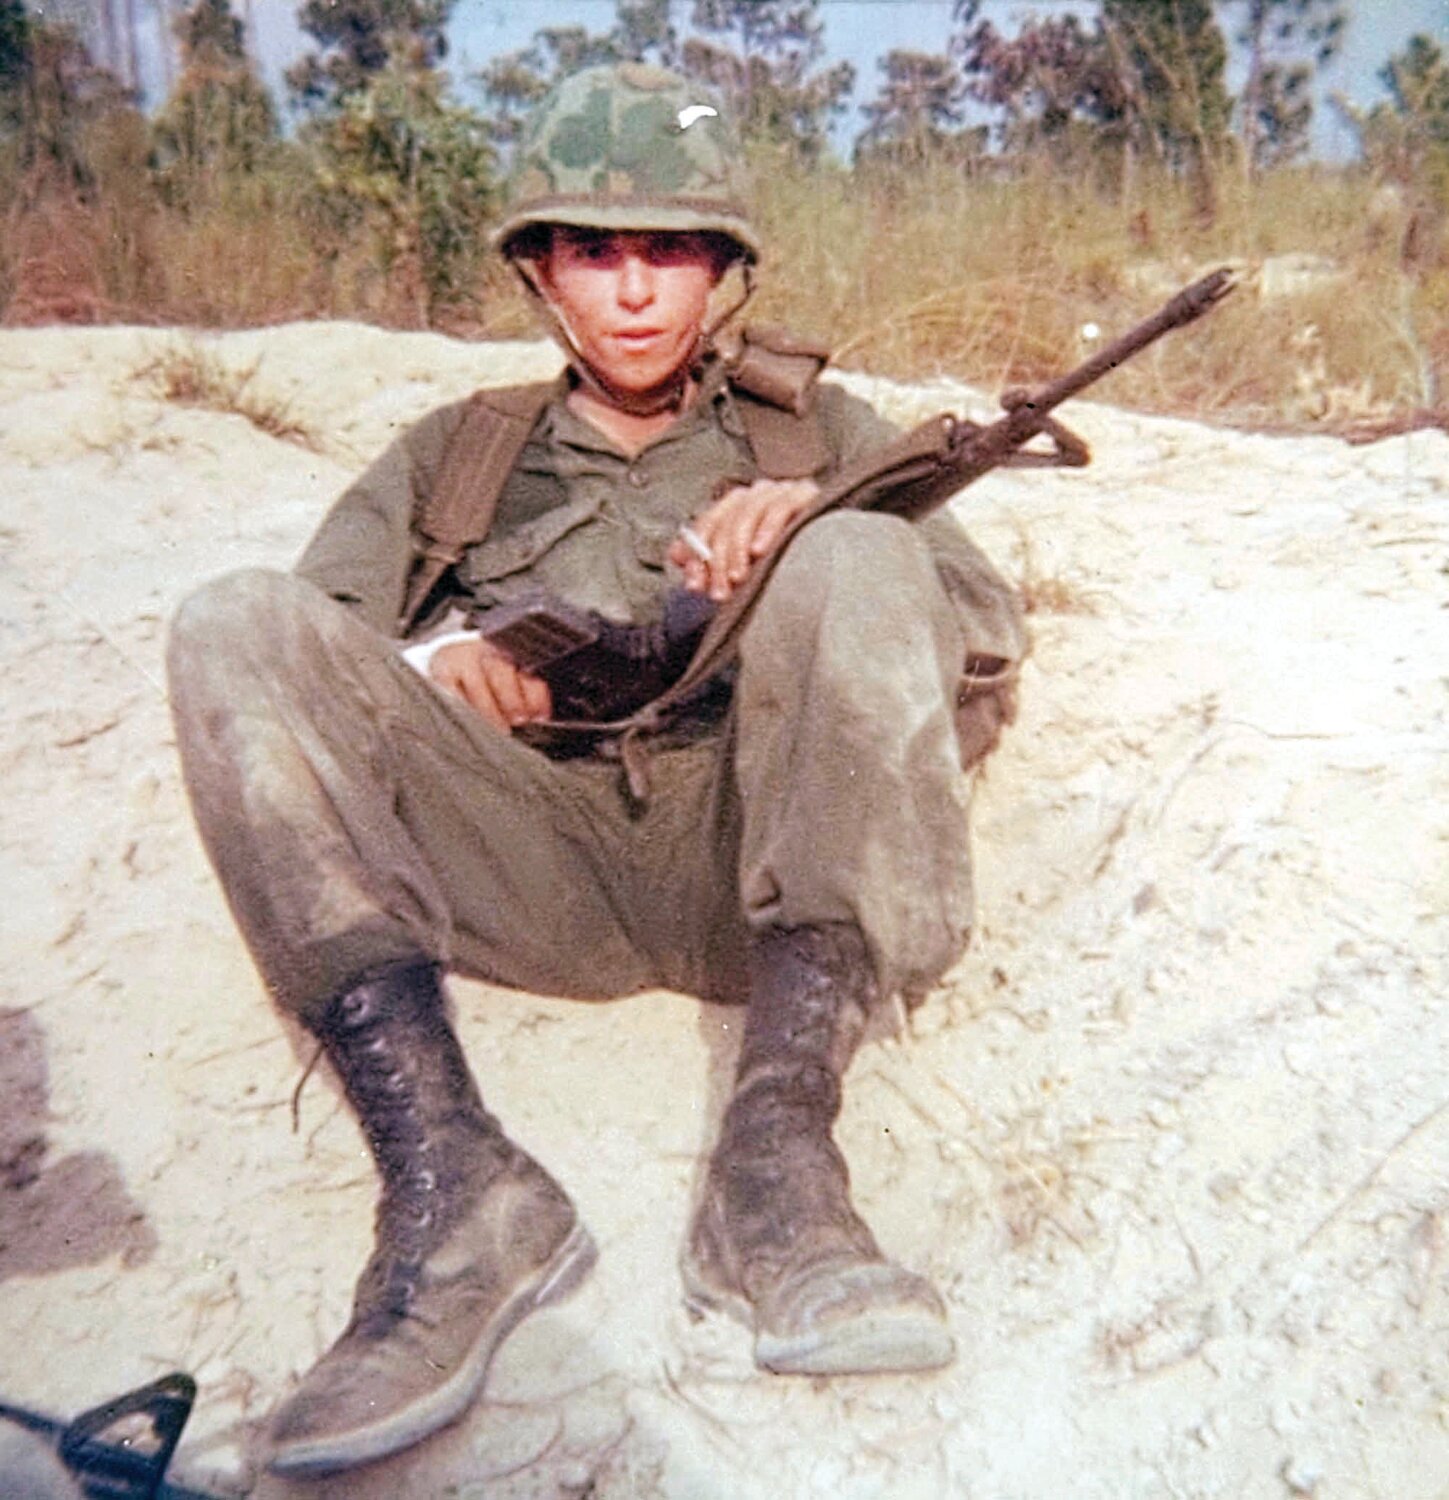 HIS LIST: Retired U.S. Army Sgt. John Tammelleo has a list of lost buddies he wants to look up on the Vietnam Memorial Wall. He plans to find each of the names and make rubbings. Tammelleo shared this photo from his time serving in the infantry during the Vietnam War.